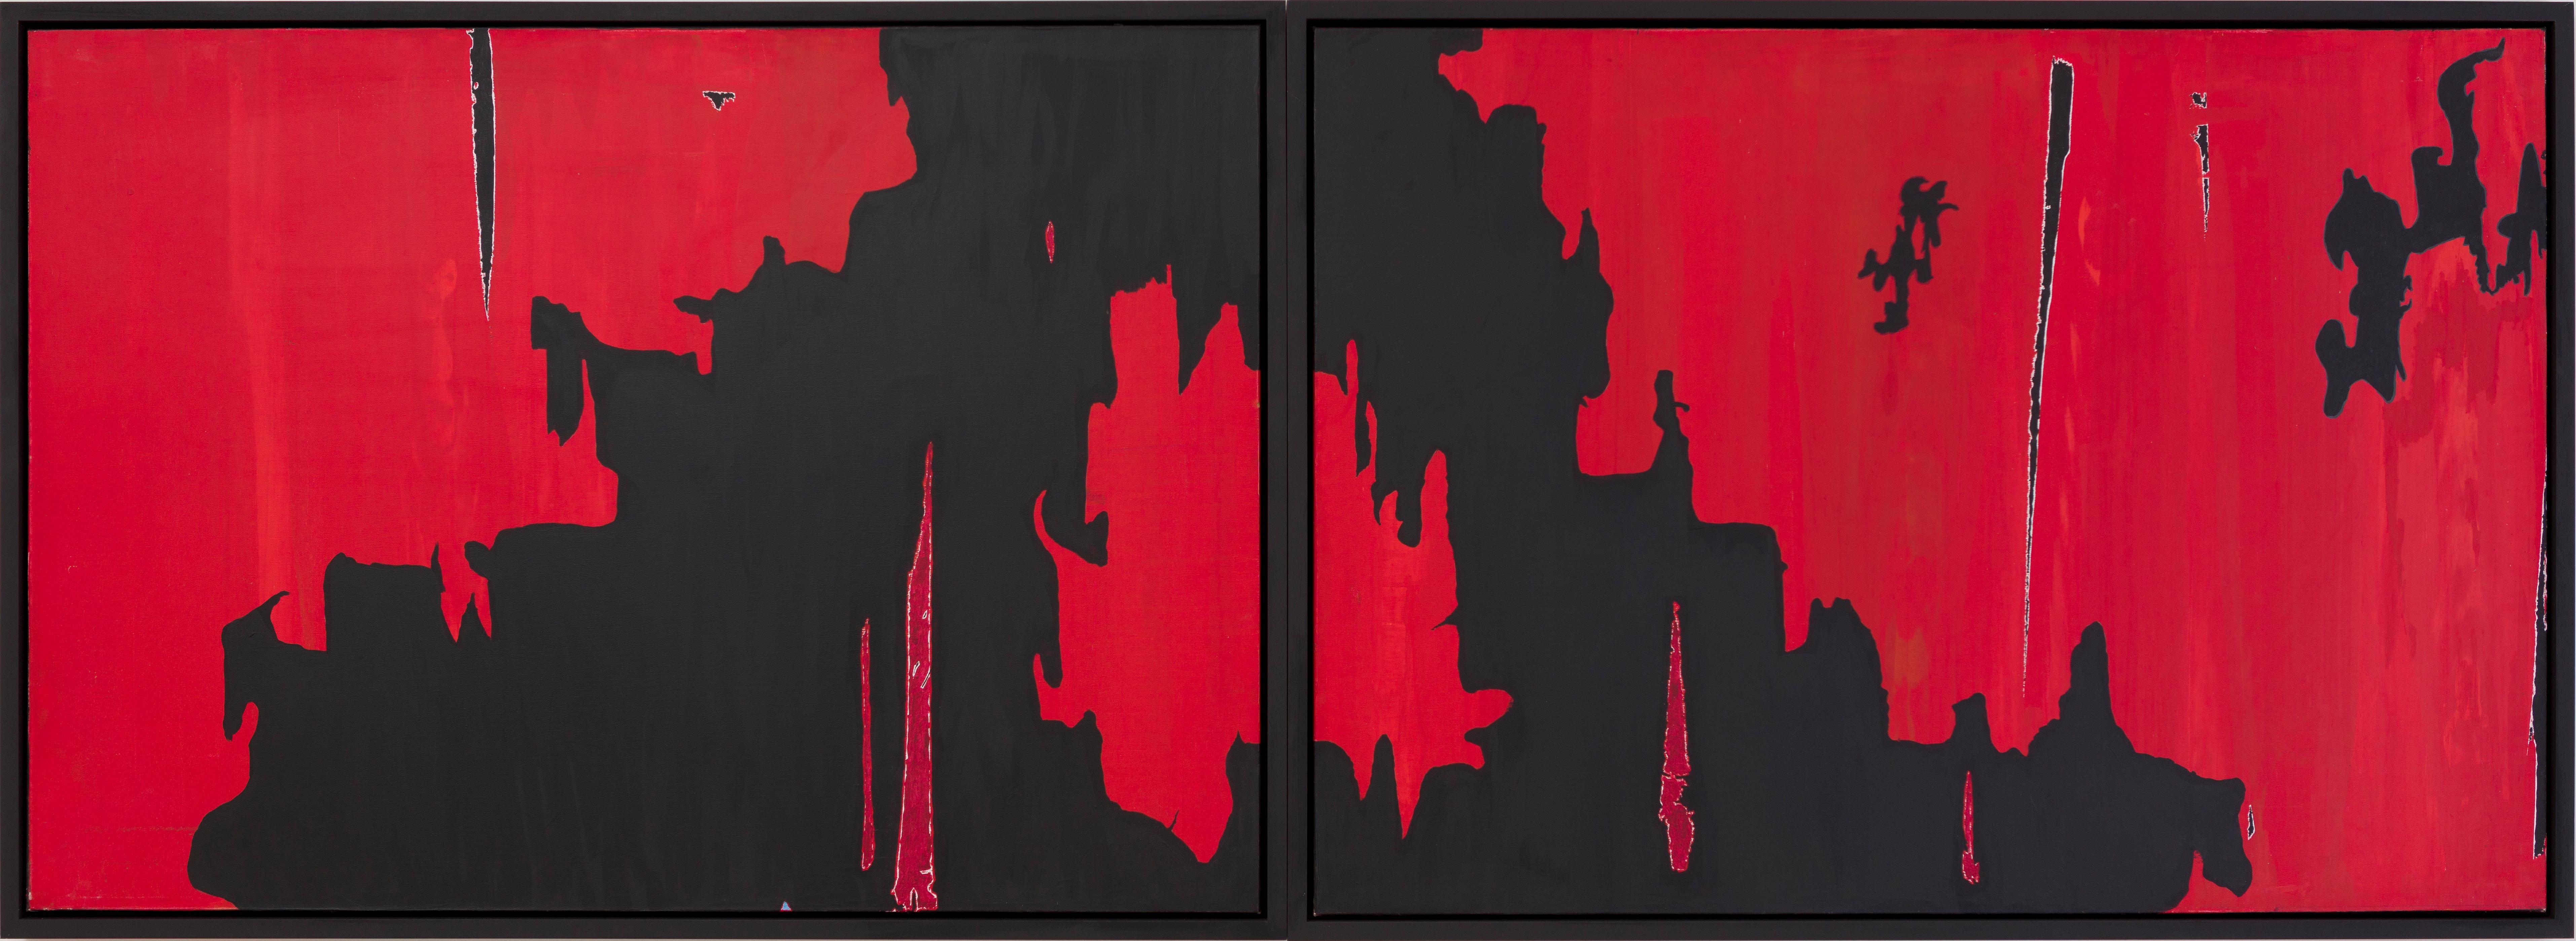 Richard Roberts Abstract Painting - Inspire (diptych) - Large contemporary abstract art by emerging artist